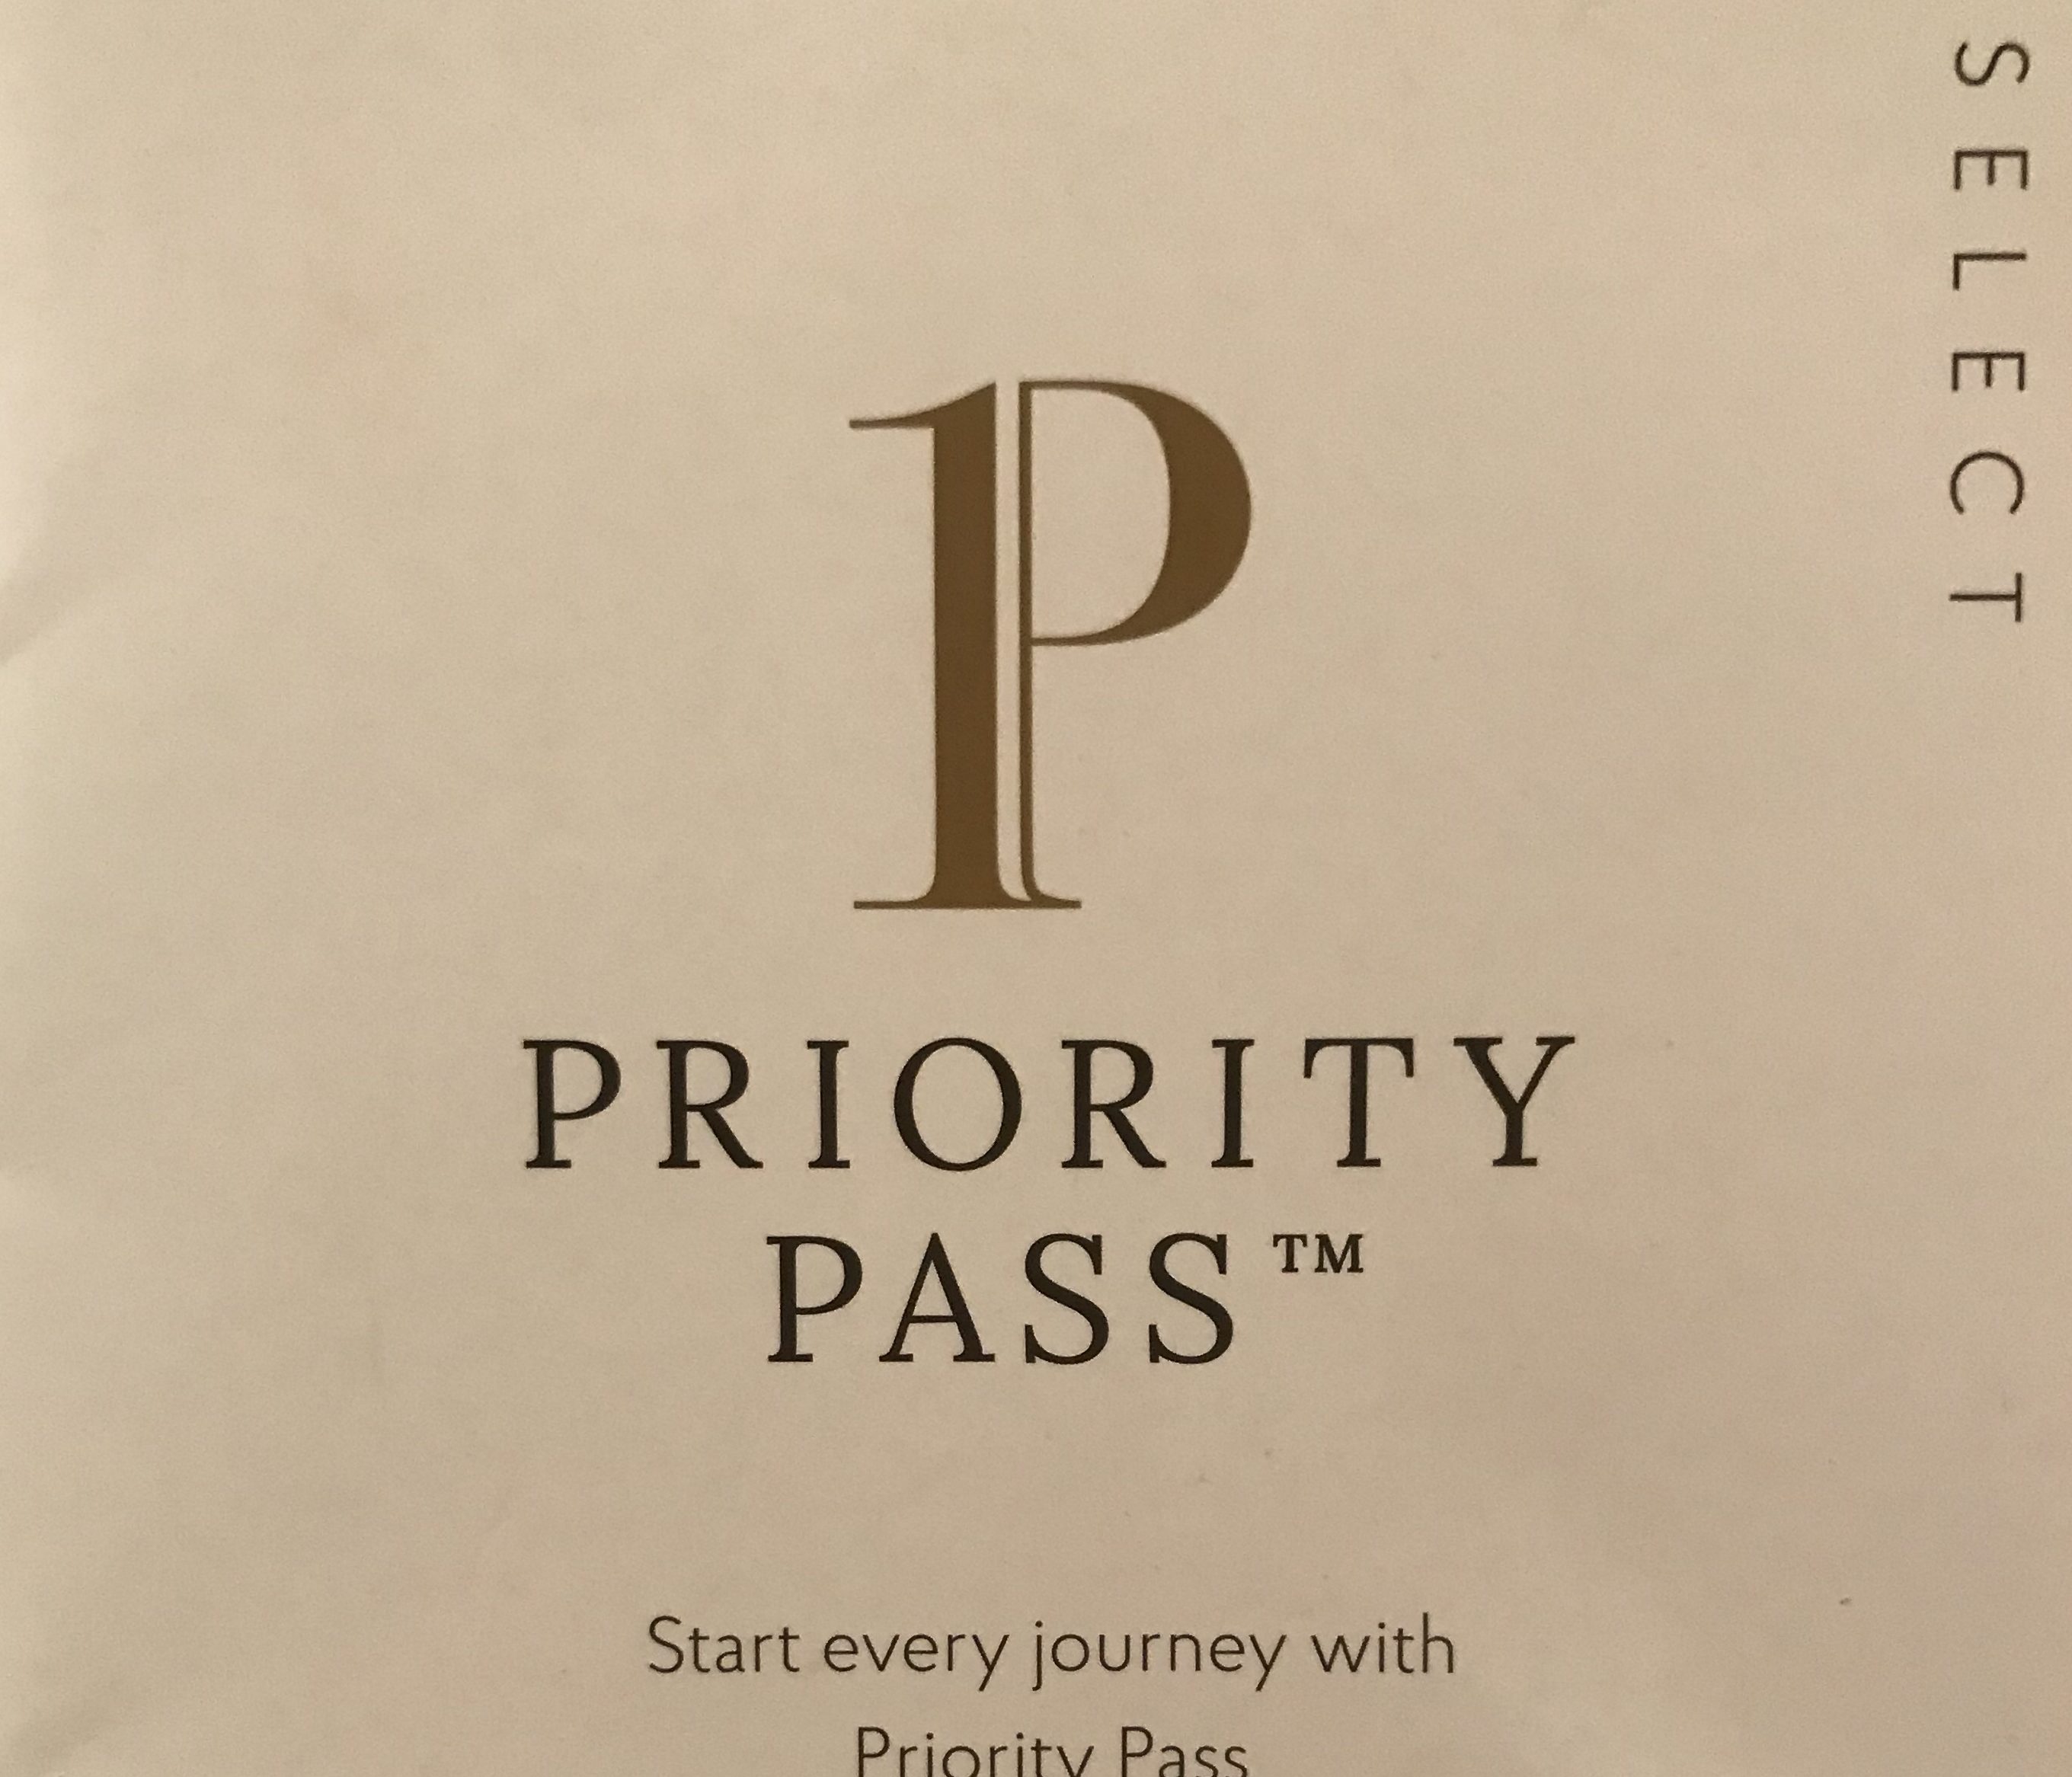 Priority Pass Offers Discounts for Retail and Dining